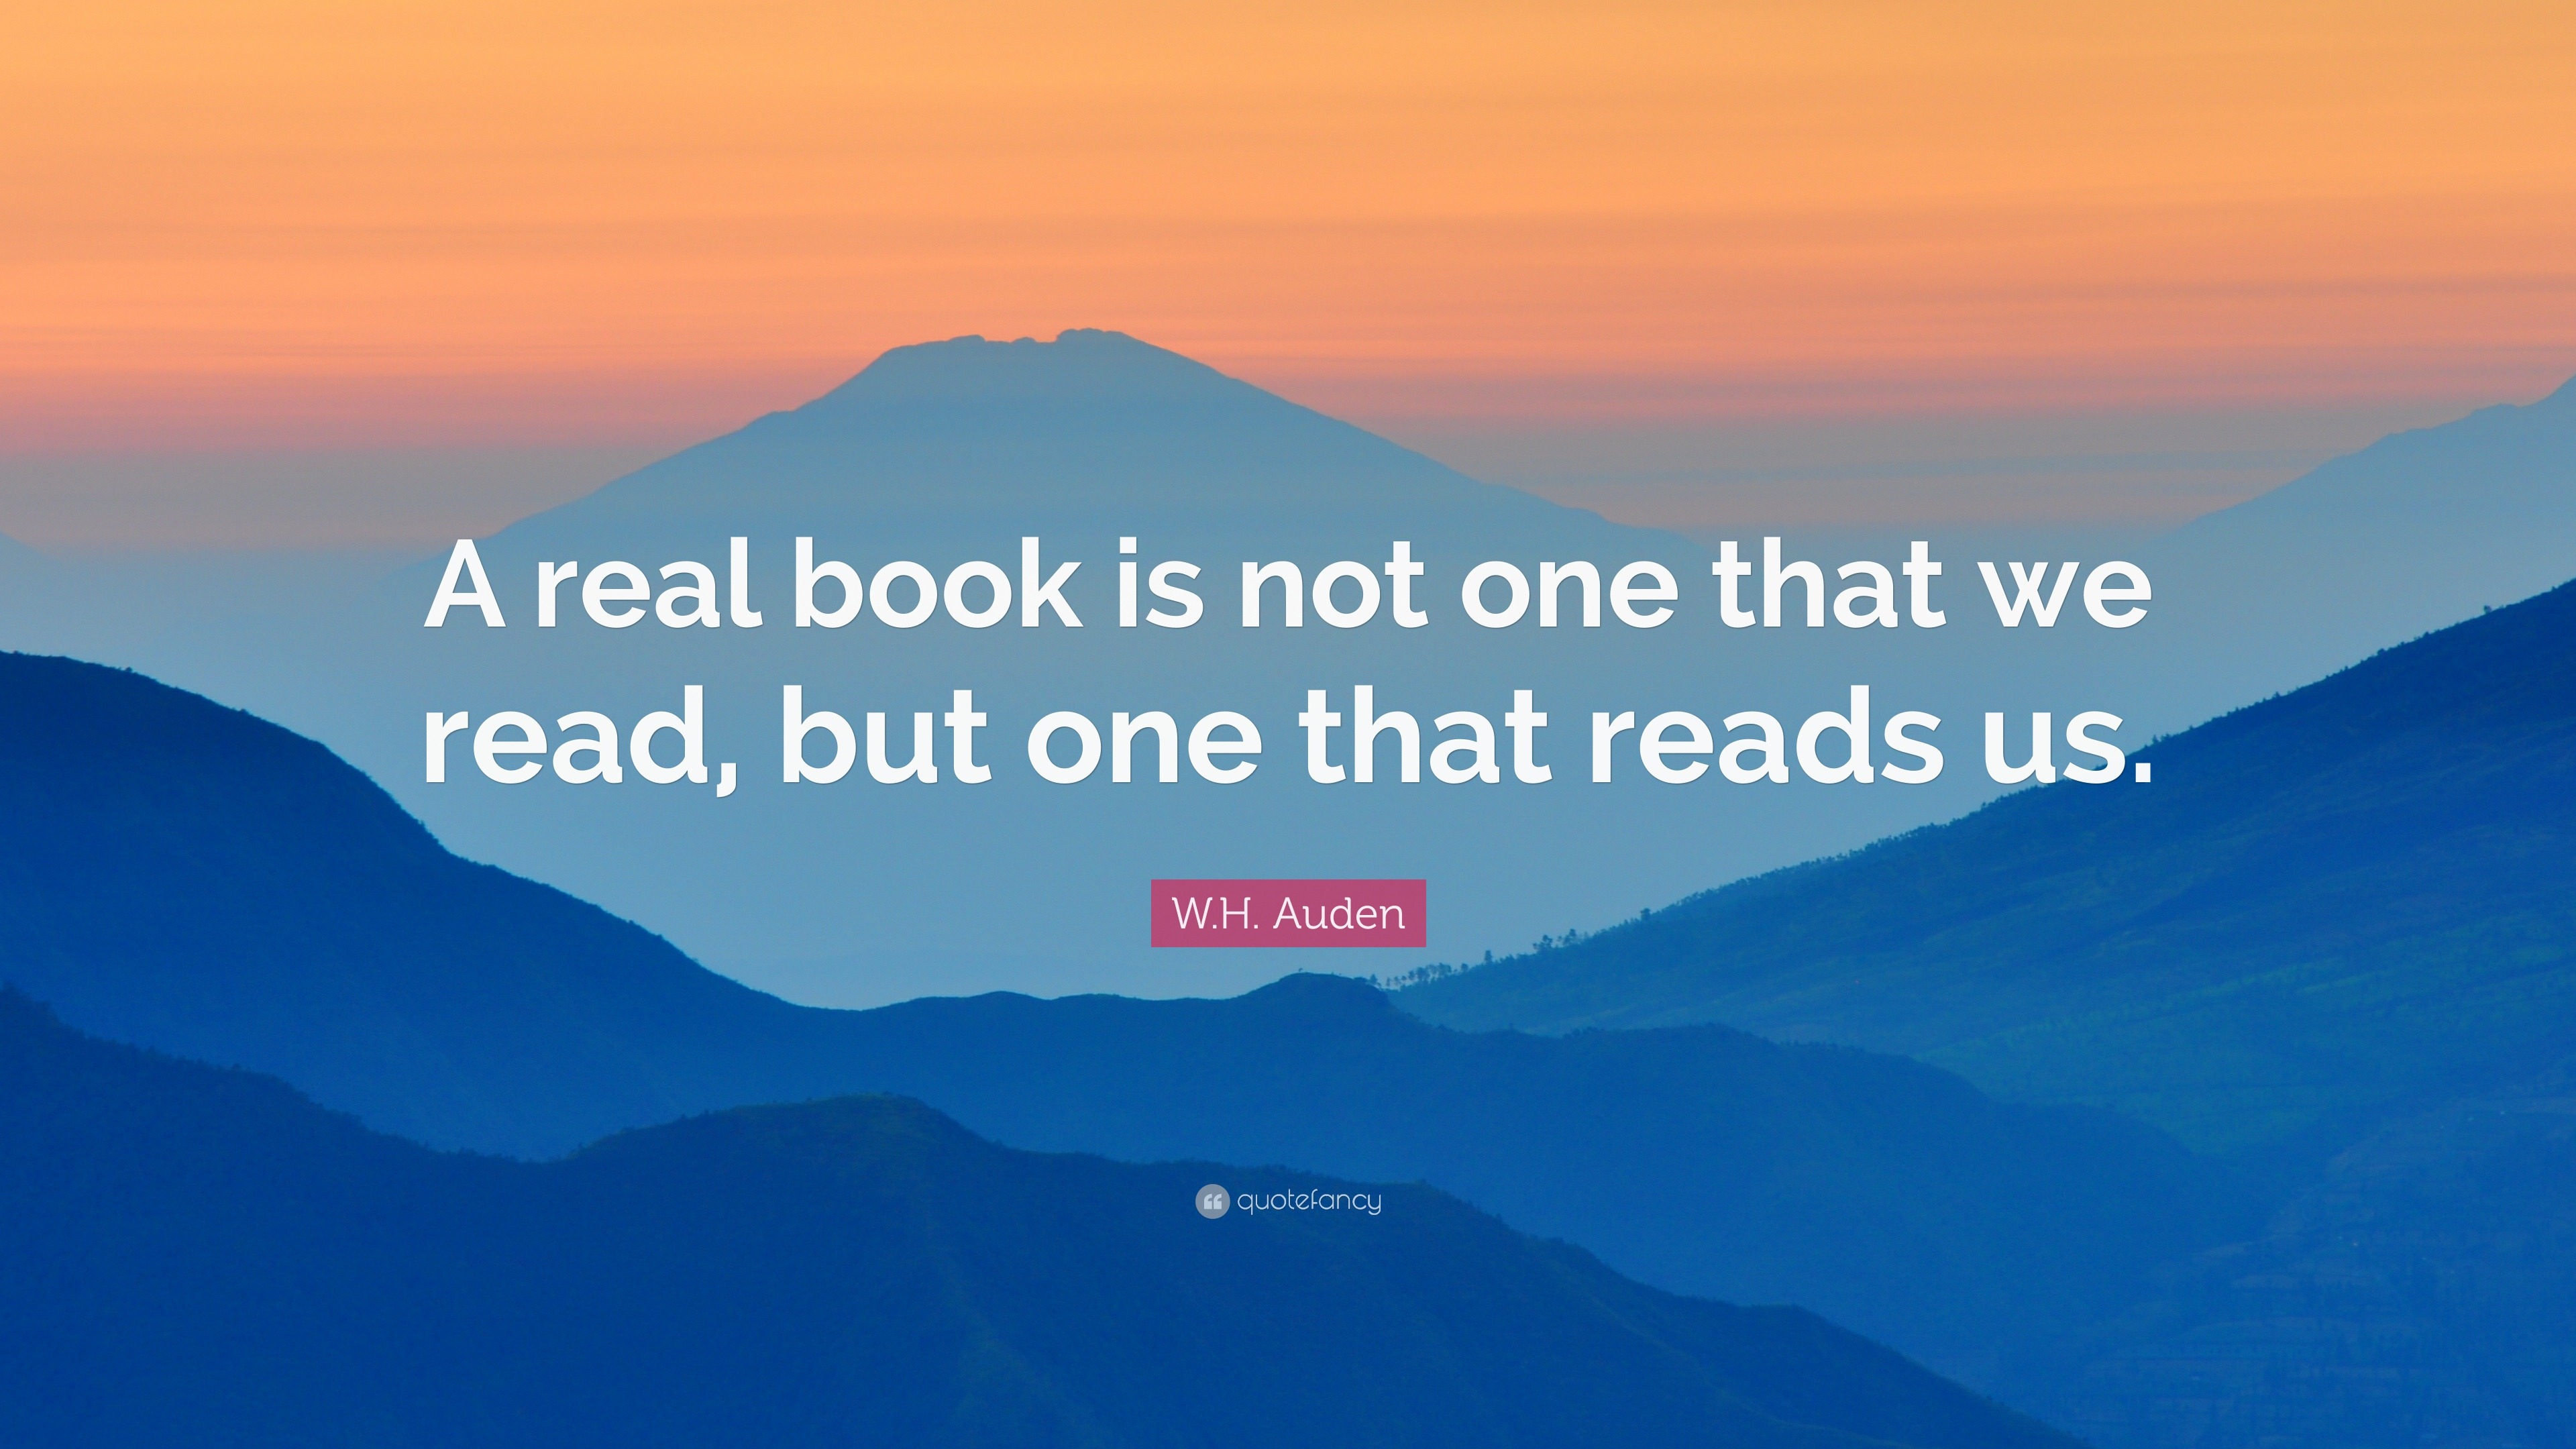 W.H. Auden Quote: “A real book is not one that we read, but one that ...